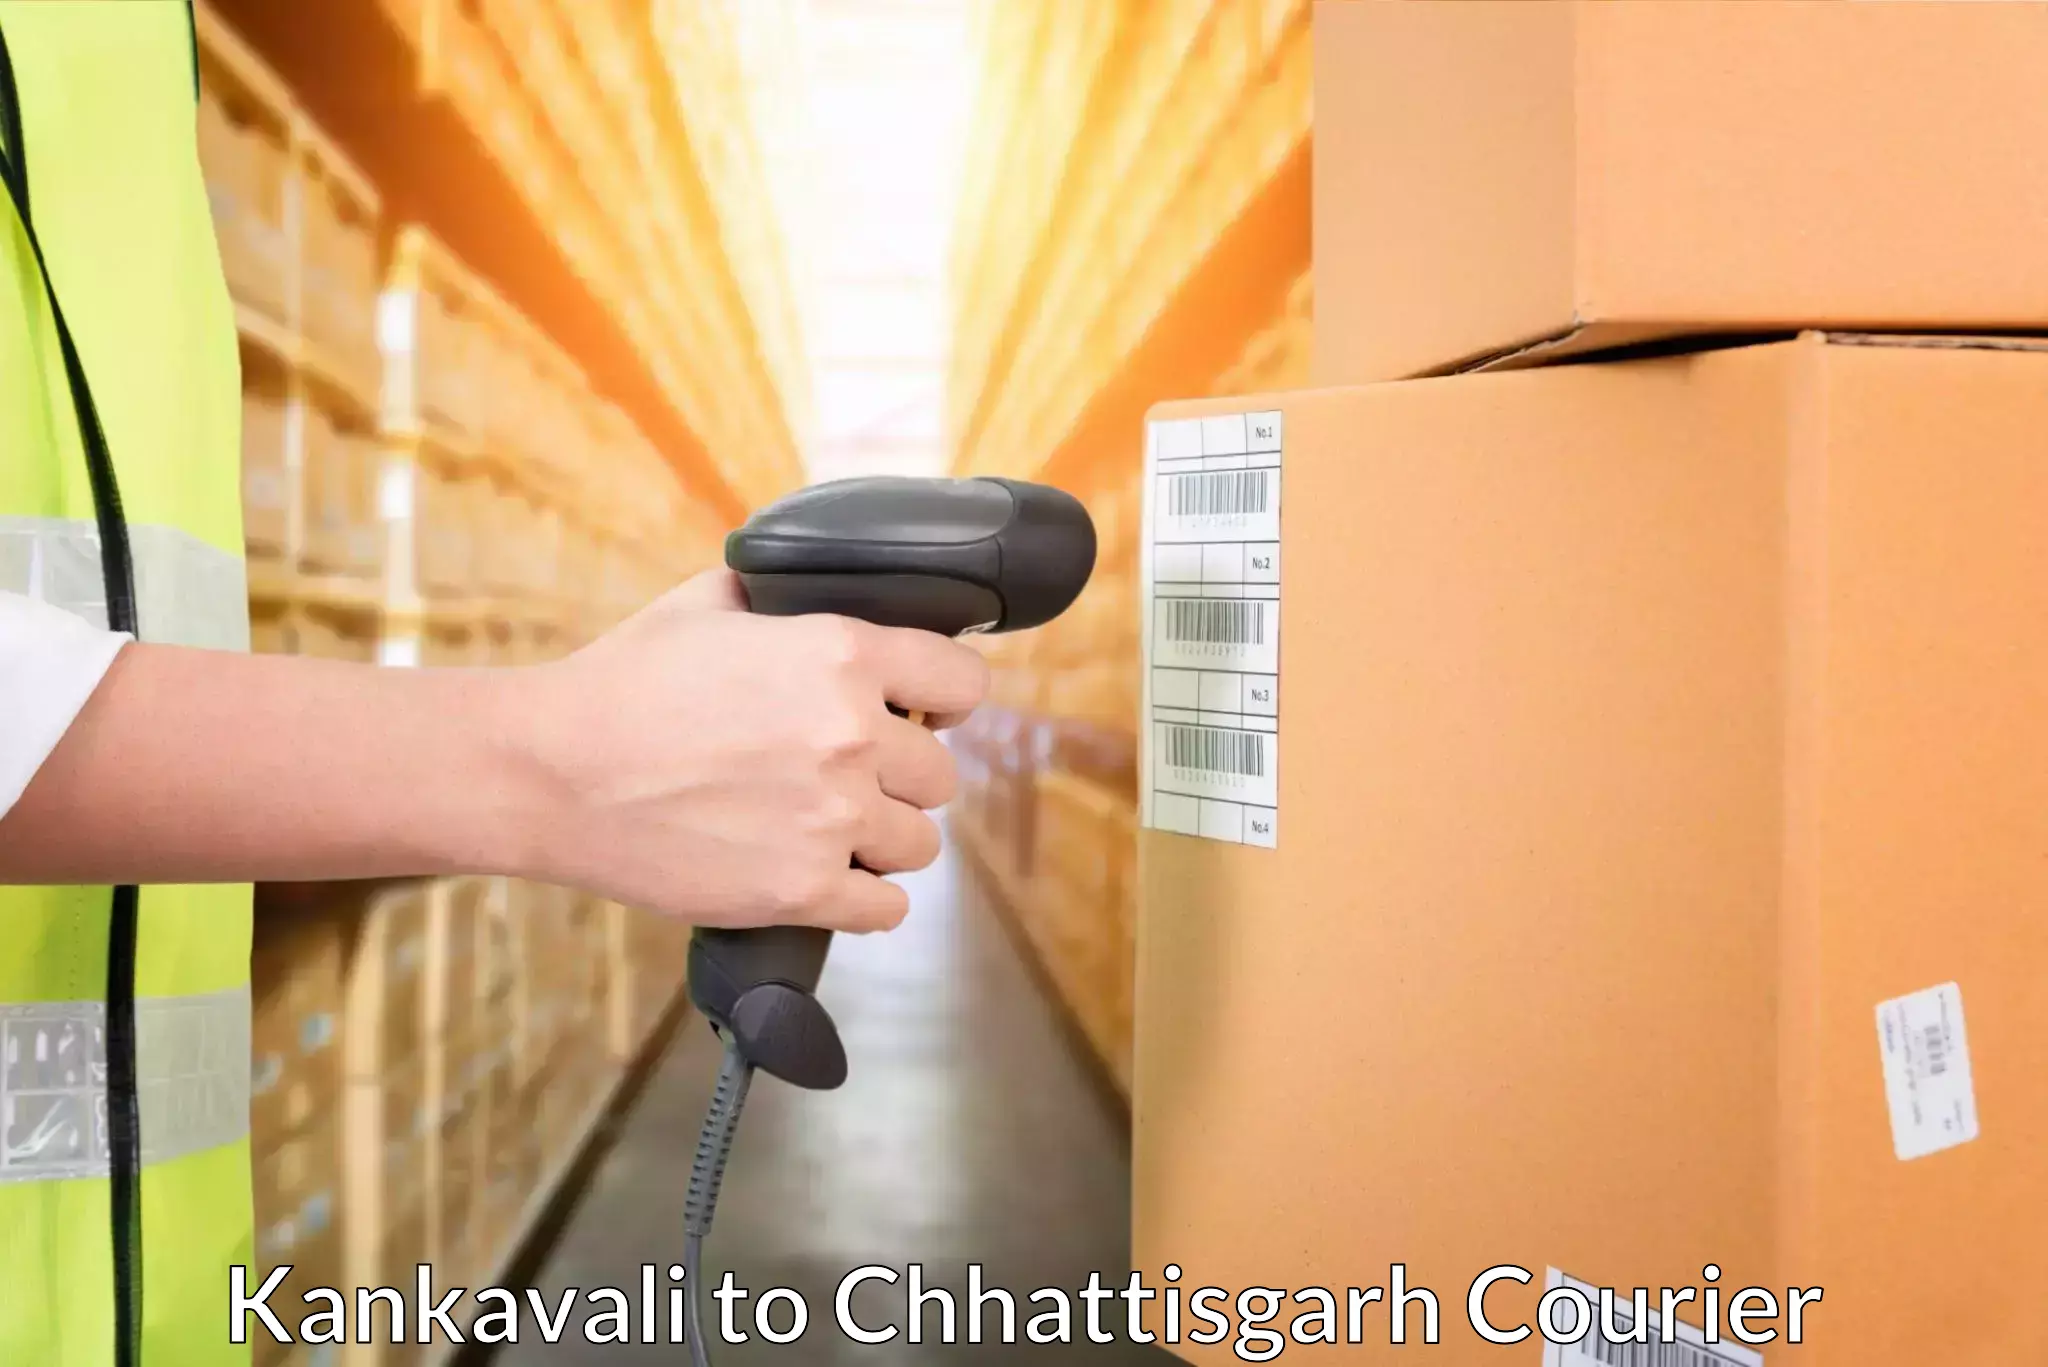 Efficient shipping operations Kankavali to Raigarh